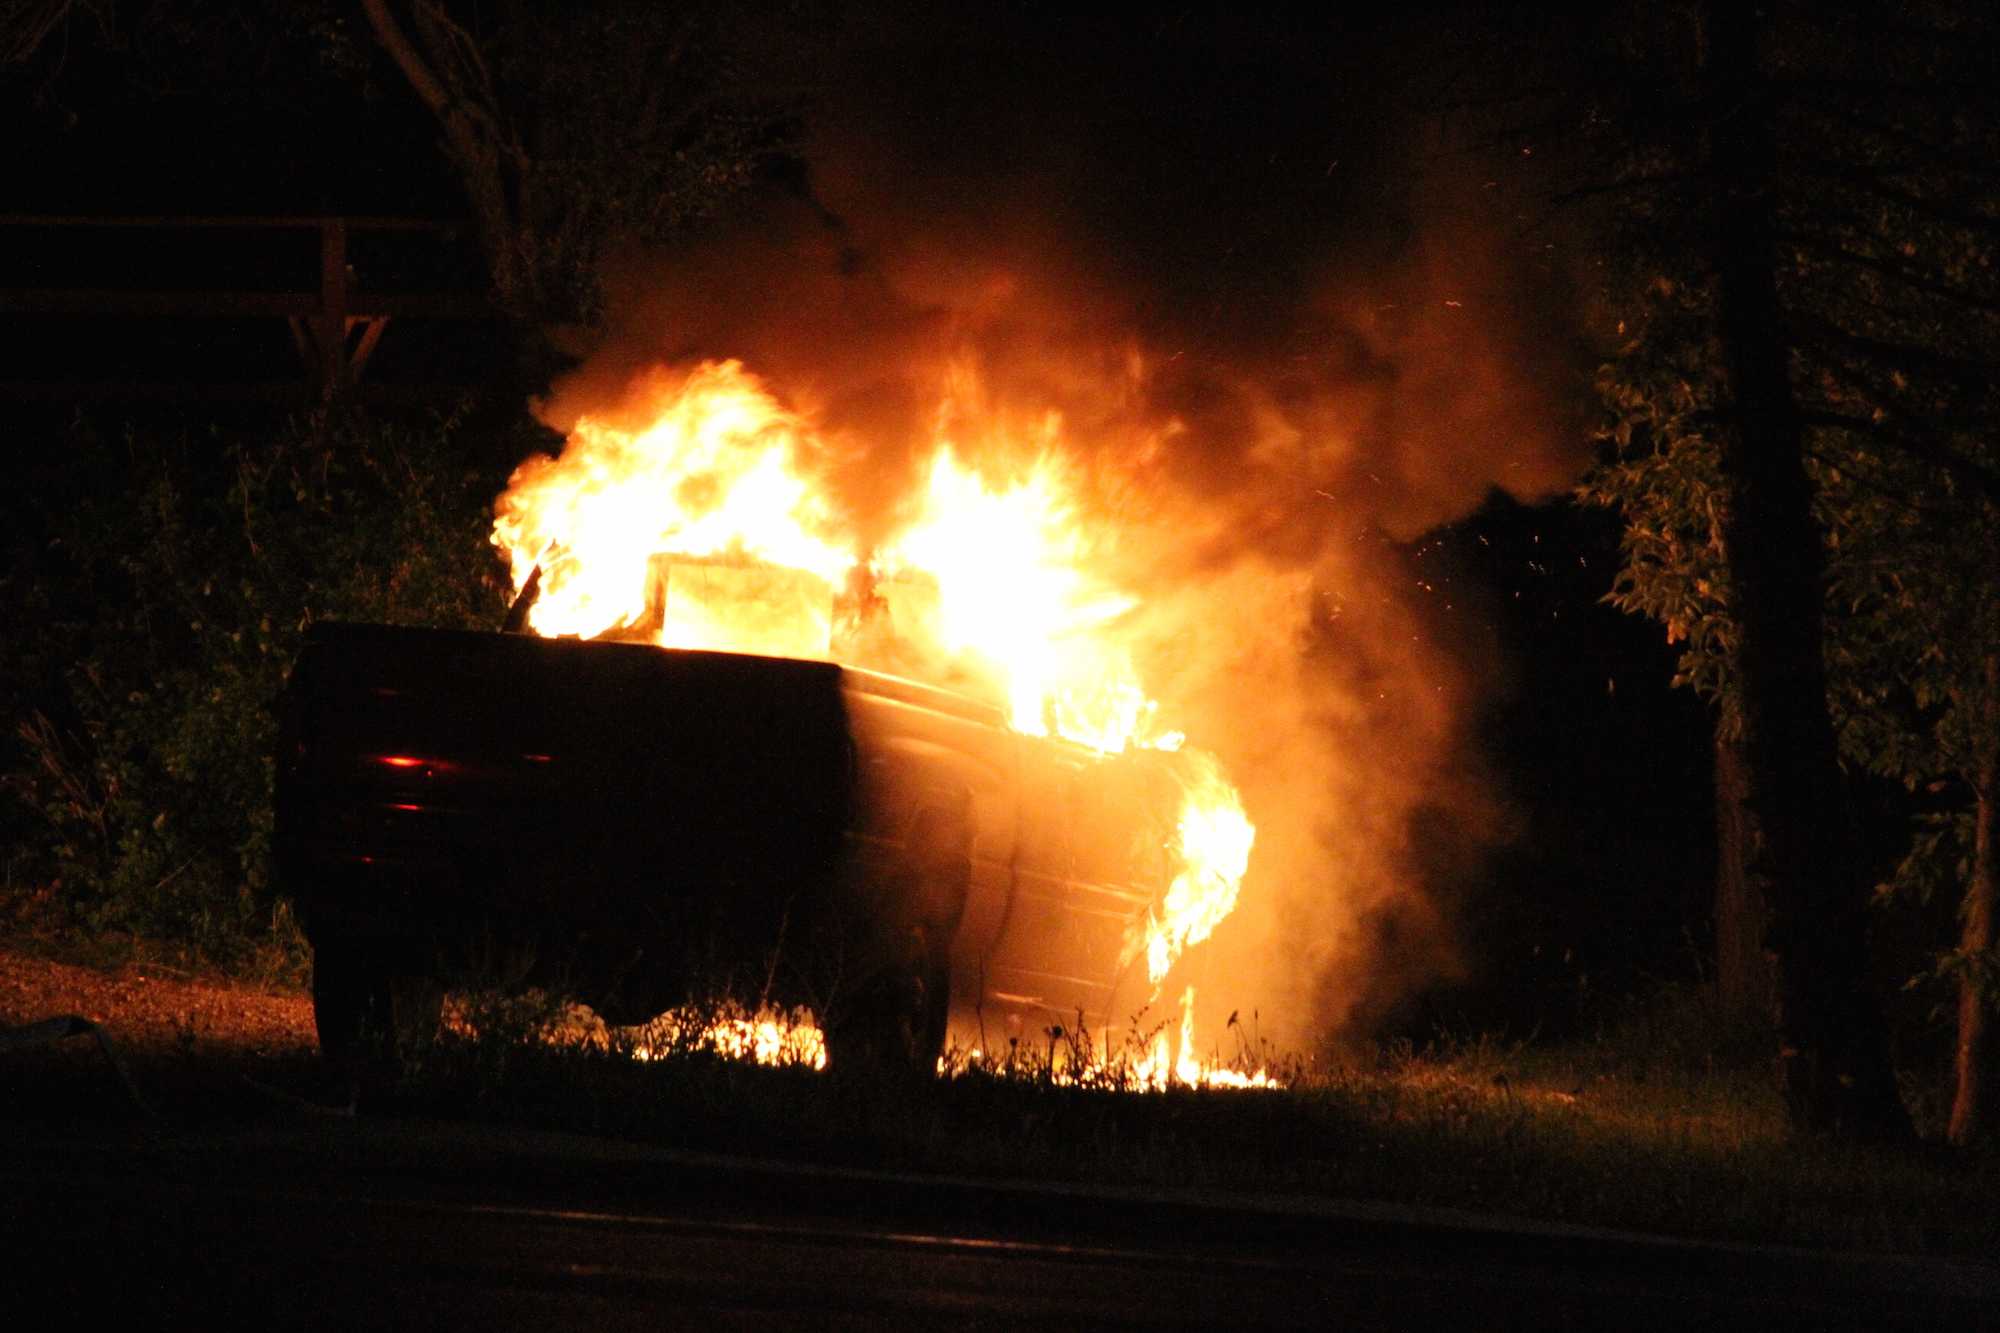 The fire began to engulf the entire cab of the truck minutes later. 